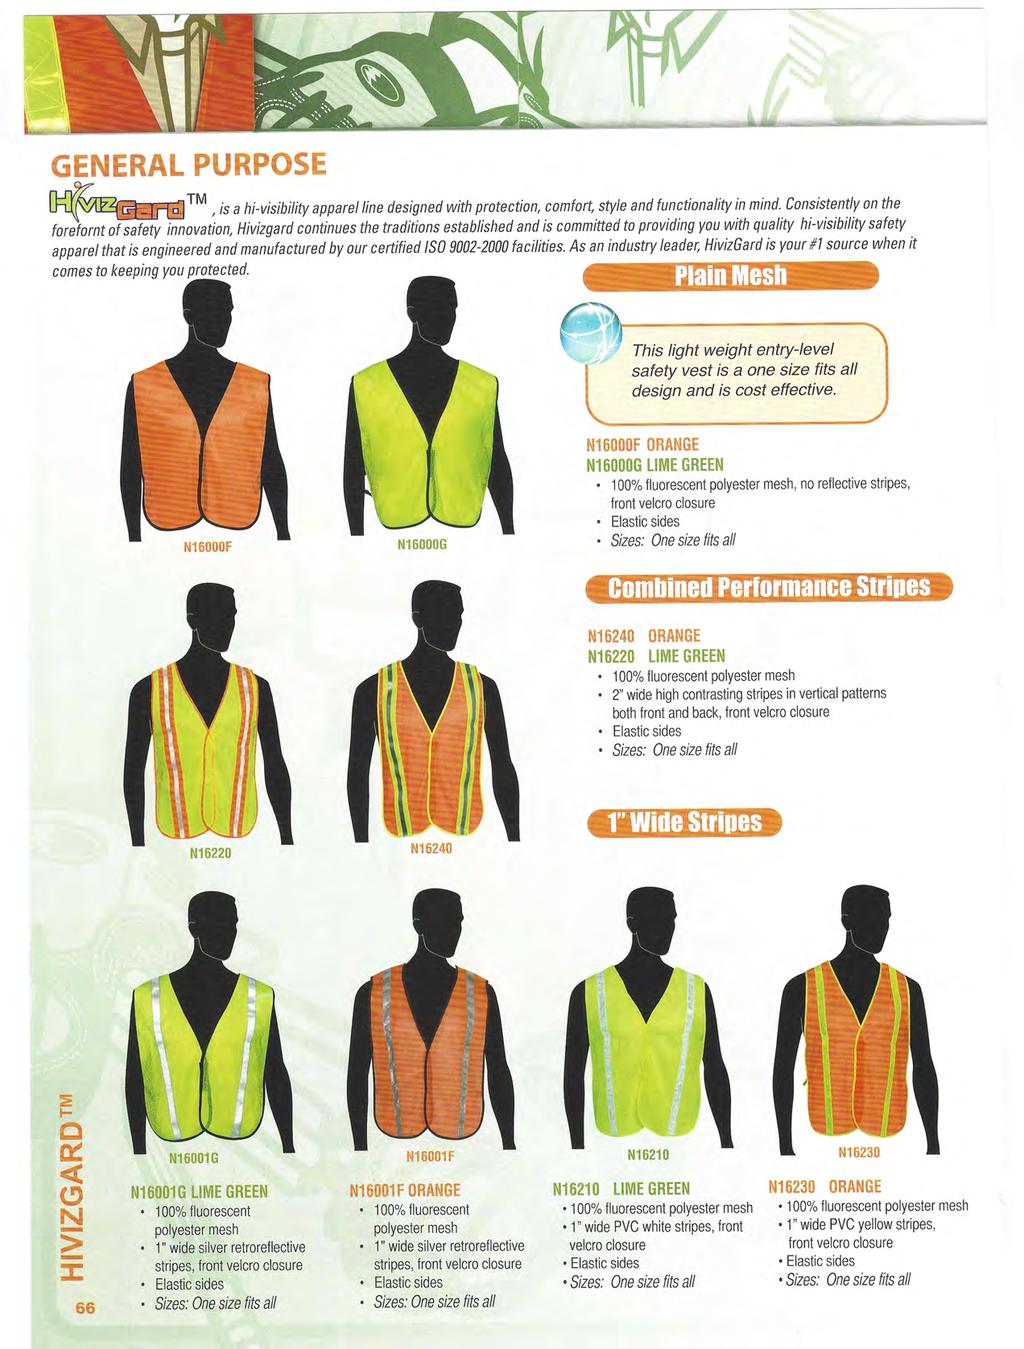 GENERAL PURPOSE TM, is a hi-visibility apparel line designed with protection, comfort, style and functionality in mind.